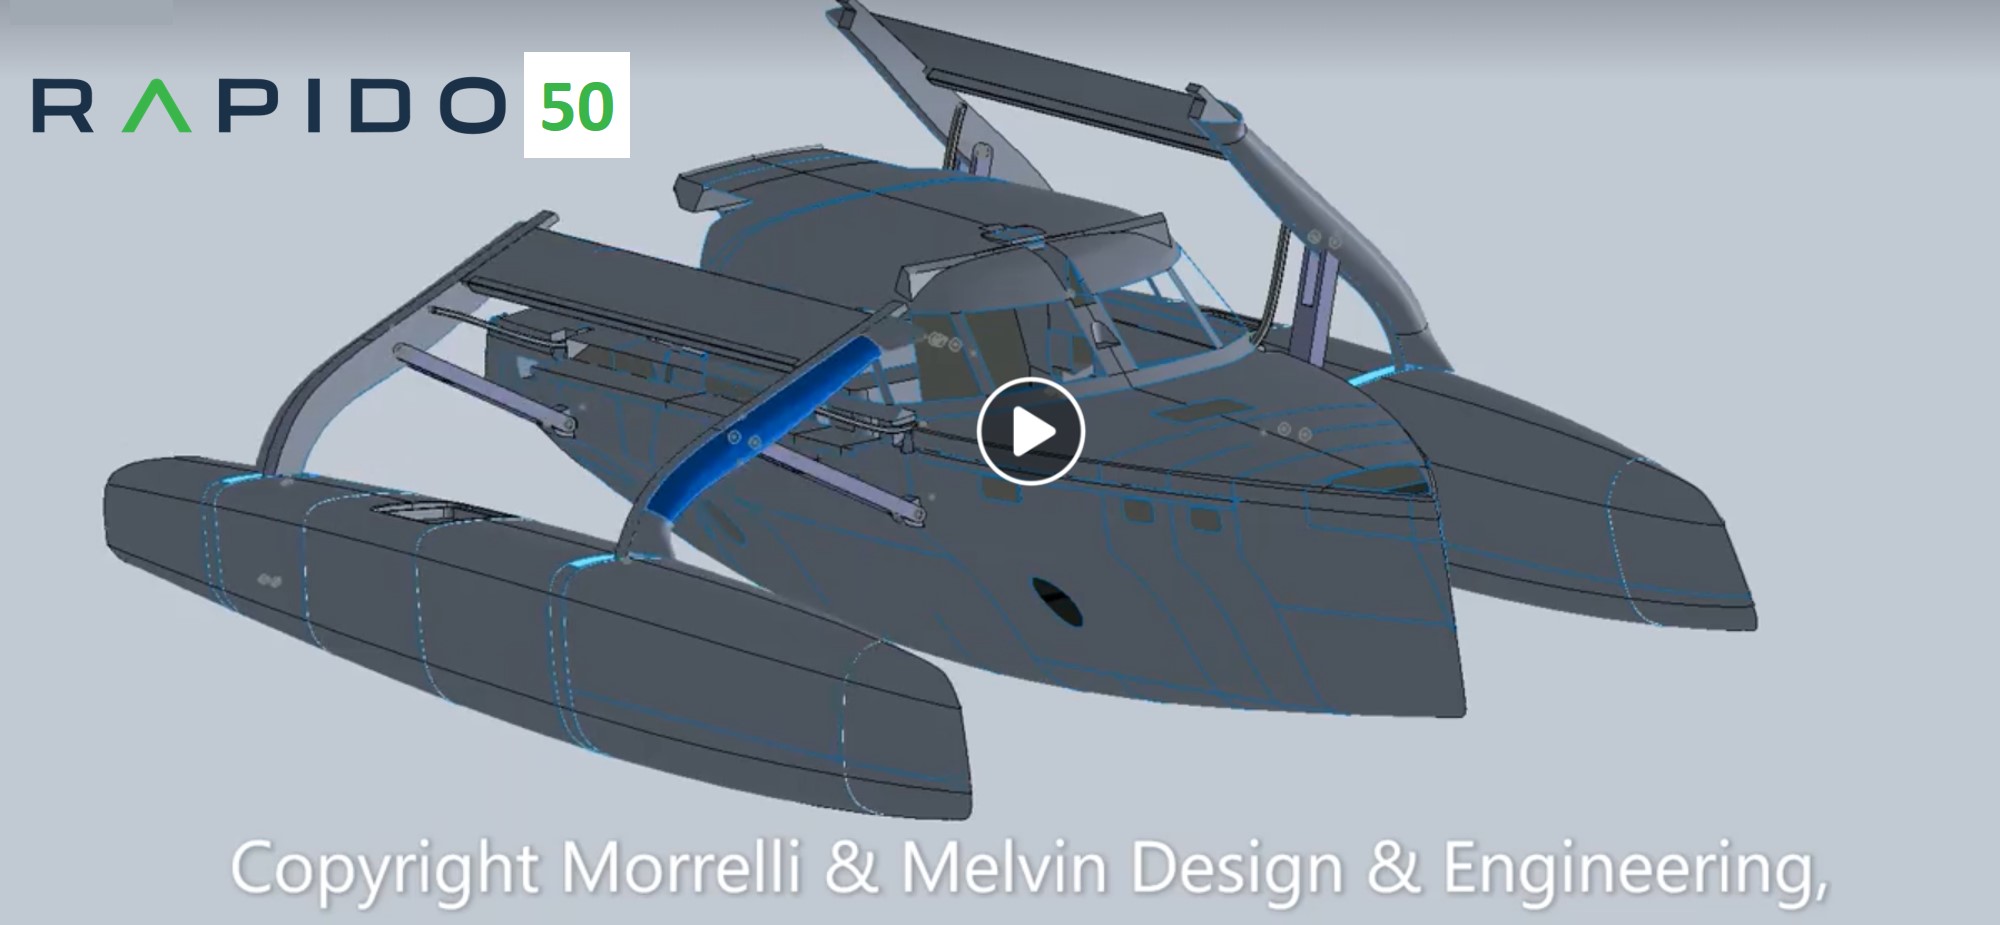 Video: Patented folding mechanism for Rapido 50